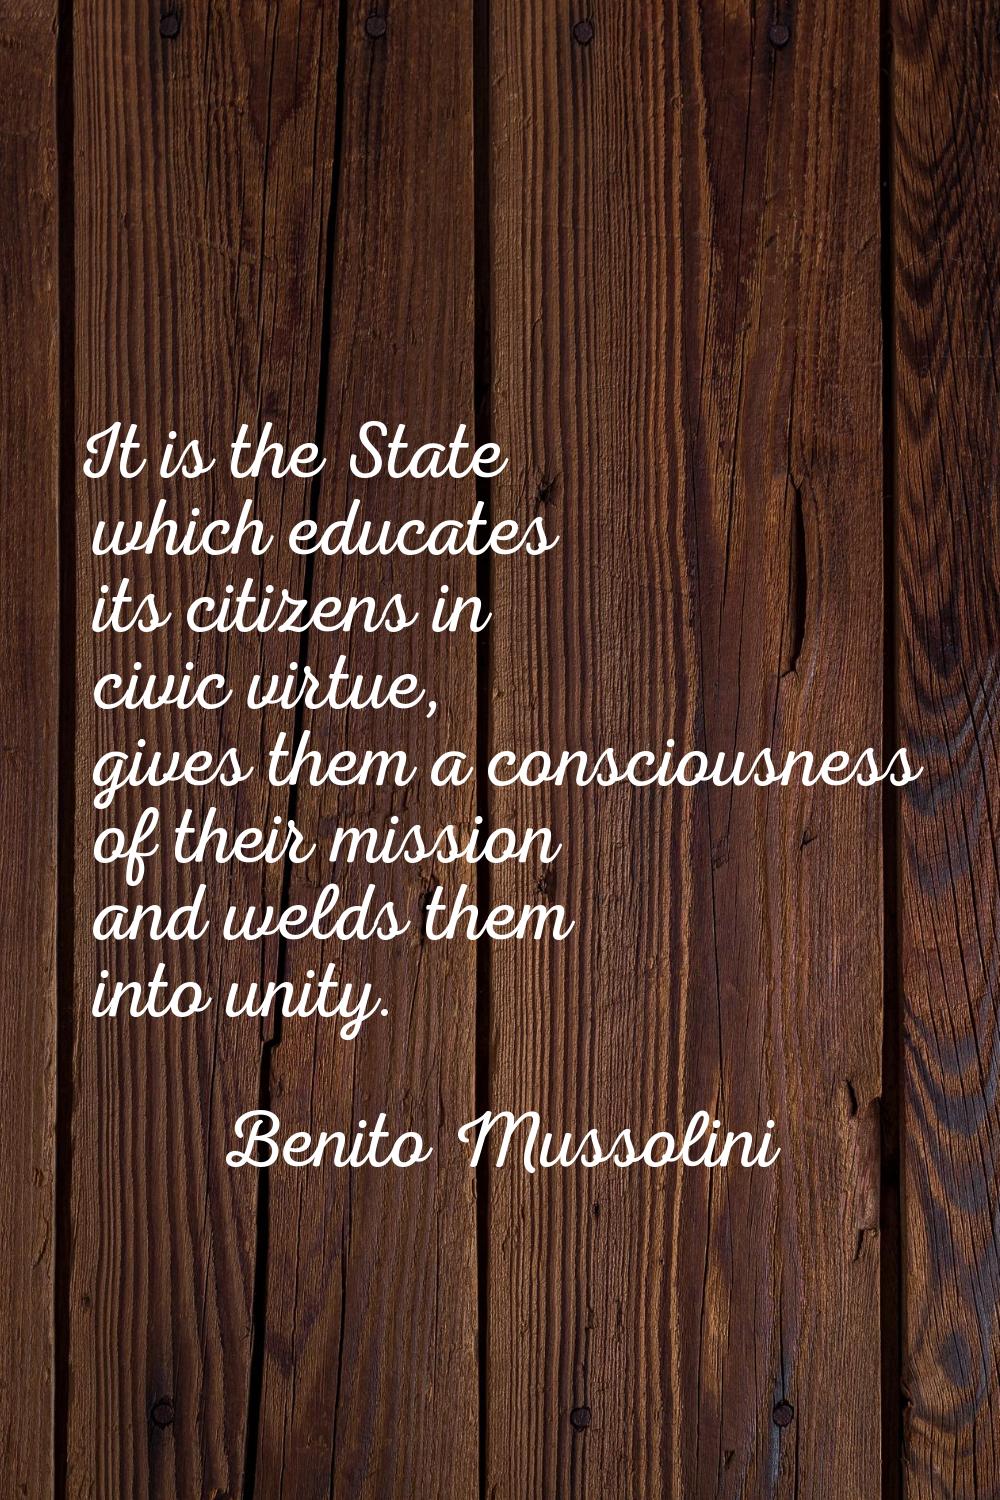 It is the State which educates its citizens in civic virtue, gives them a consciousness of their mi